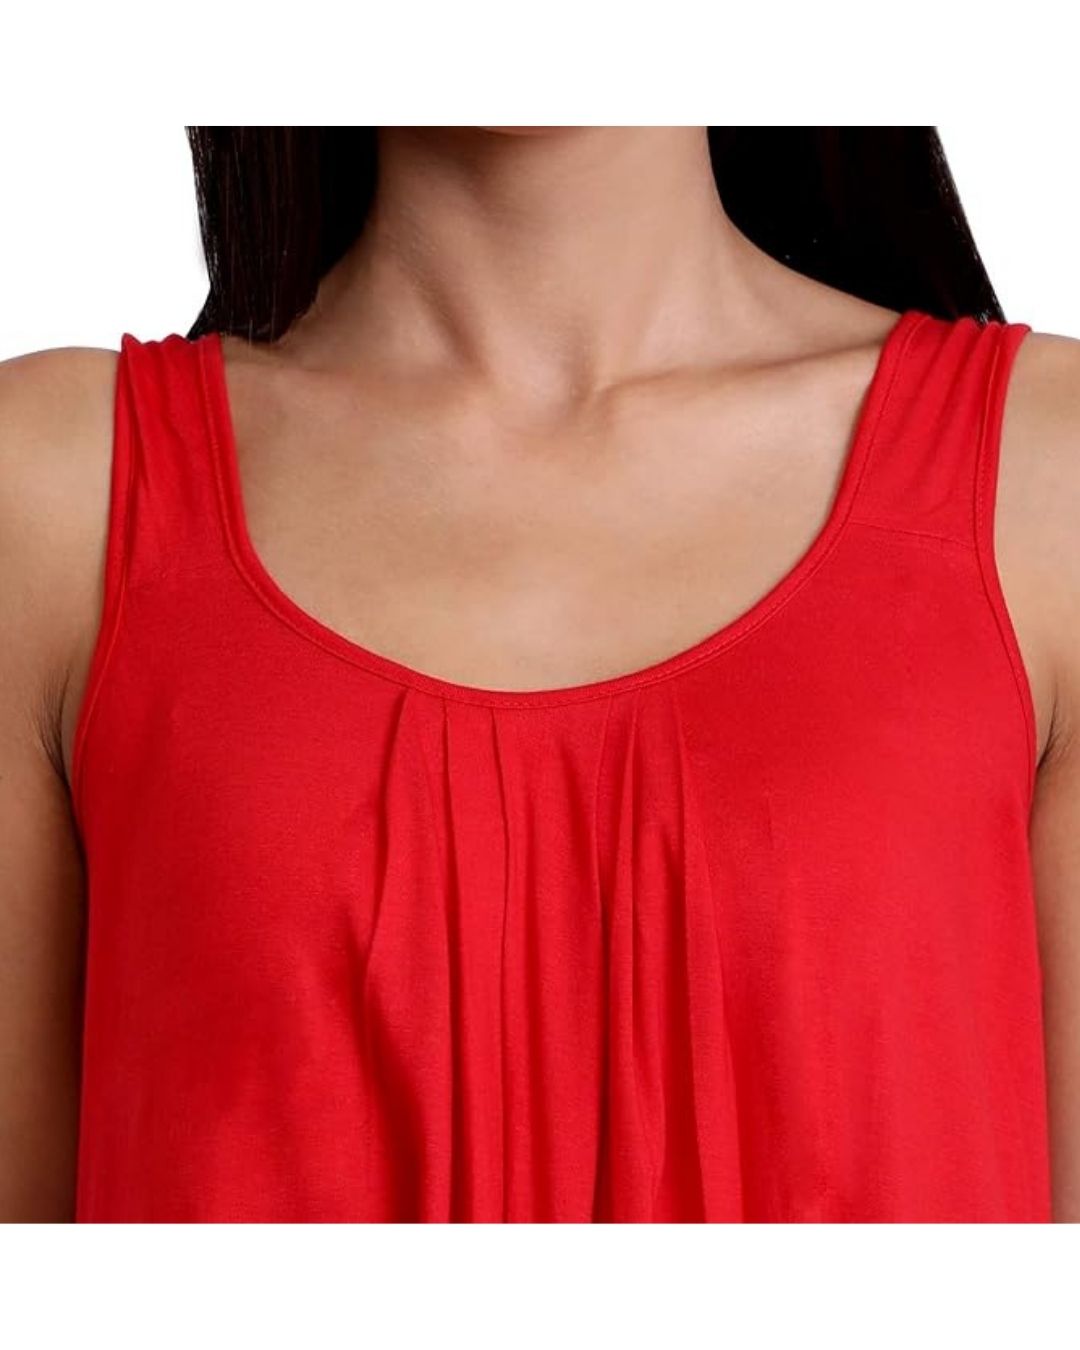 TWGE Cotton Full Length Camisole for Women - Long Innerwear - Color Red